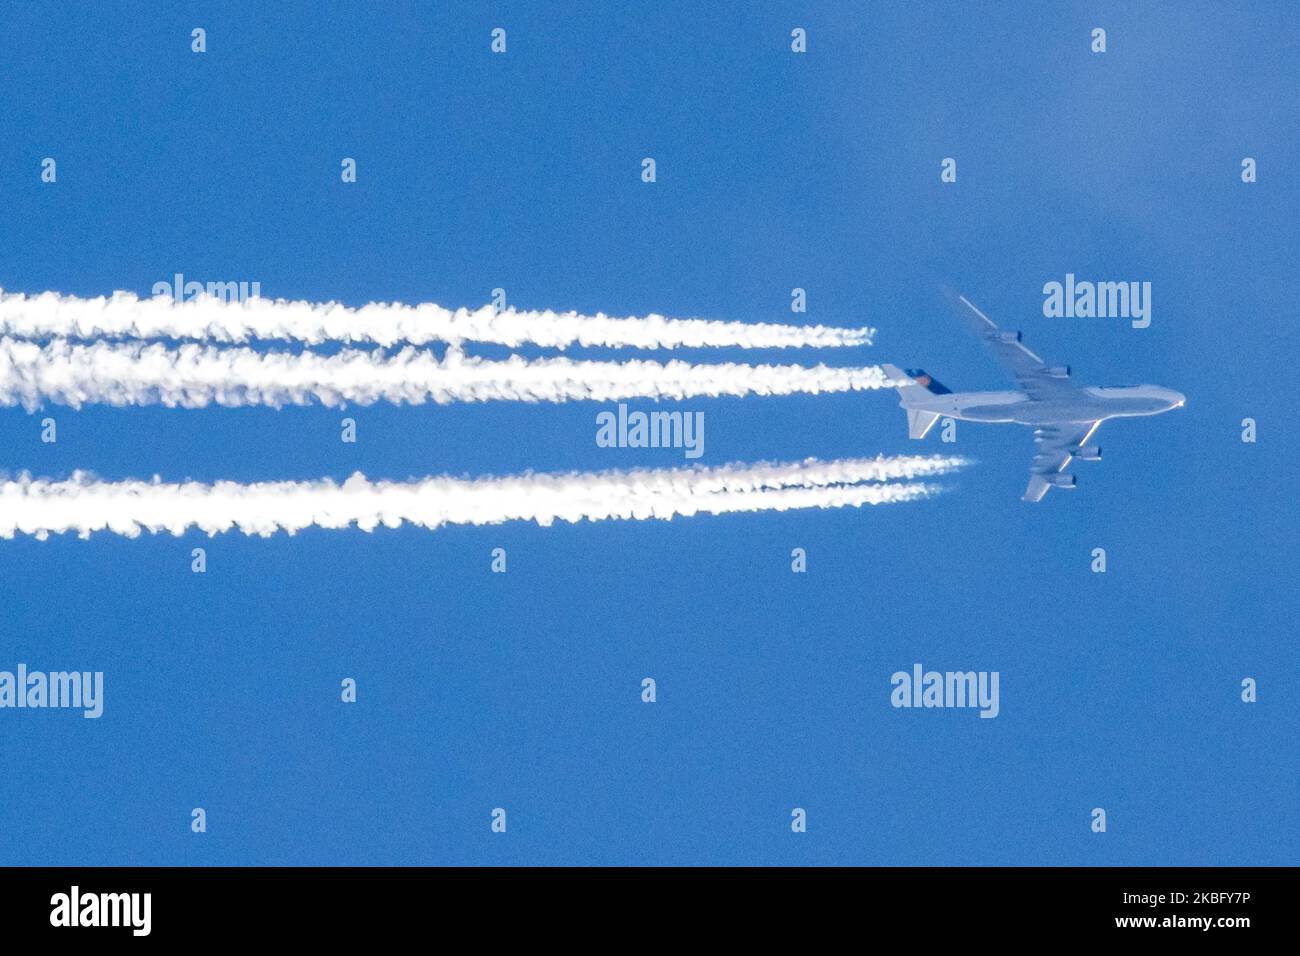 Lufthansa Boeing 747 commercial airplane overfly forming engine exhaust contrails behind in high altitude in the blue sky. The iconic double-decker Jumbo Jet nicknamed Queen of the Skies is flying at 34.000 feet on 29 January 2020 over the Netherlands as it is flying a trans-Atlantic route from Frankfurt FRA airport in Germany to Toronto, YYZ, Canada, flight LH470 / DLH470. The overflying aircraft is a Boeing 747-430, B744 with registration D-ABVX and speed 726km/h or 392 kts (knots). Lufthansa is the flag carrier of Germany and a Star Alliance member. (Photo by Nicolas Economou/NurPhoto) Stock Photo